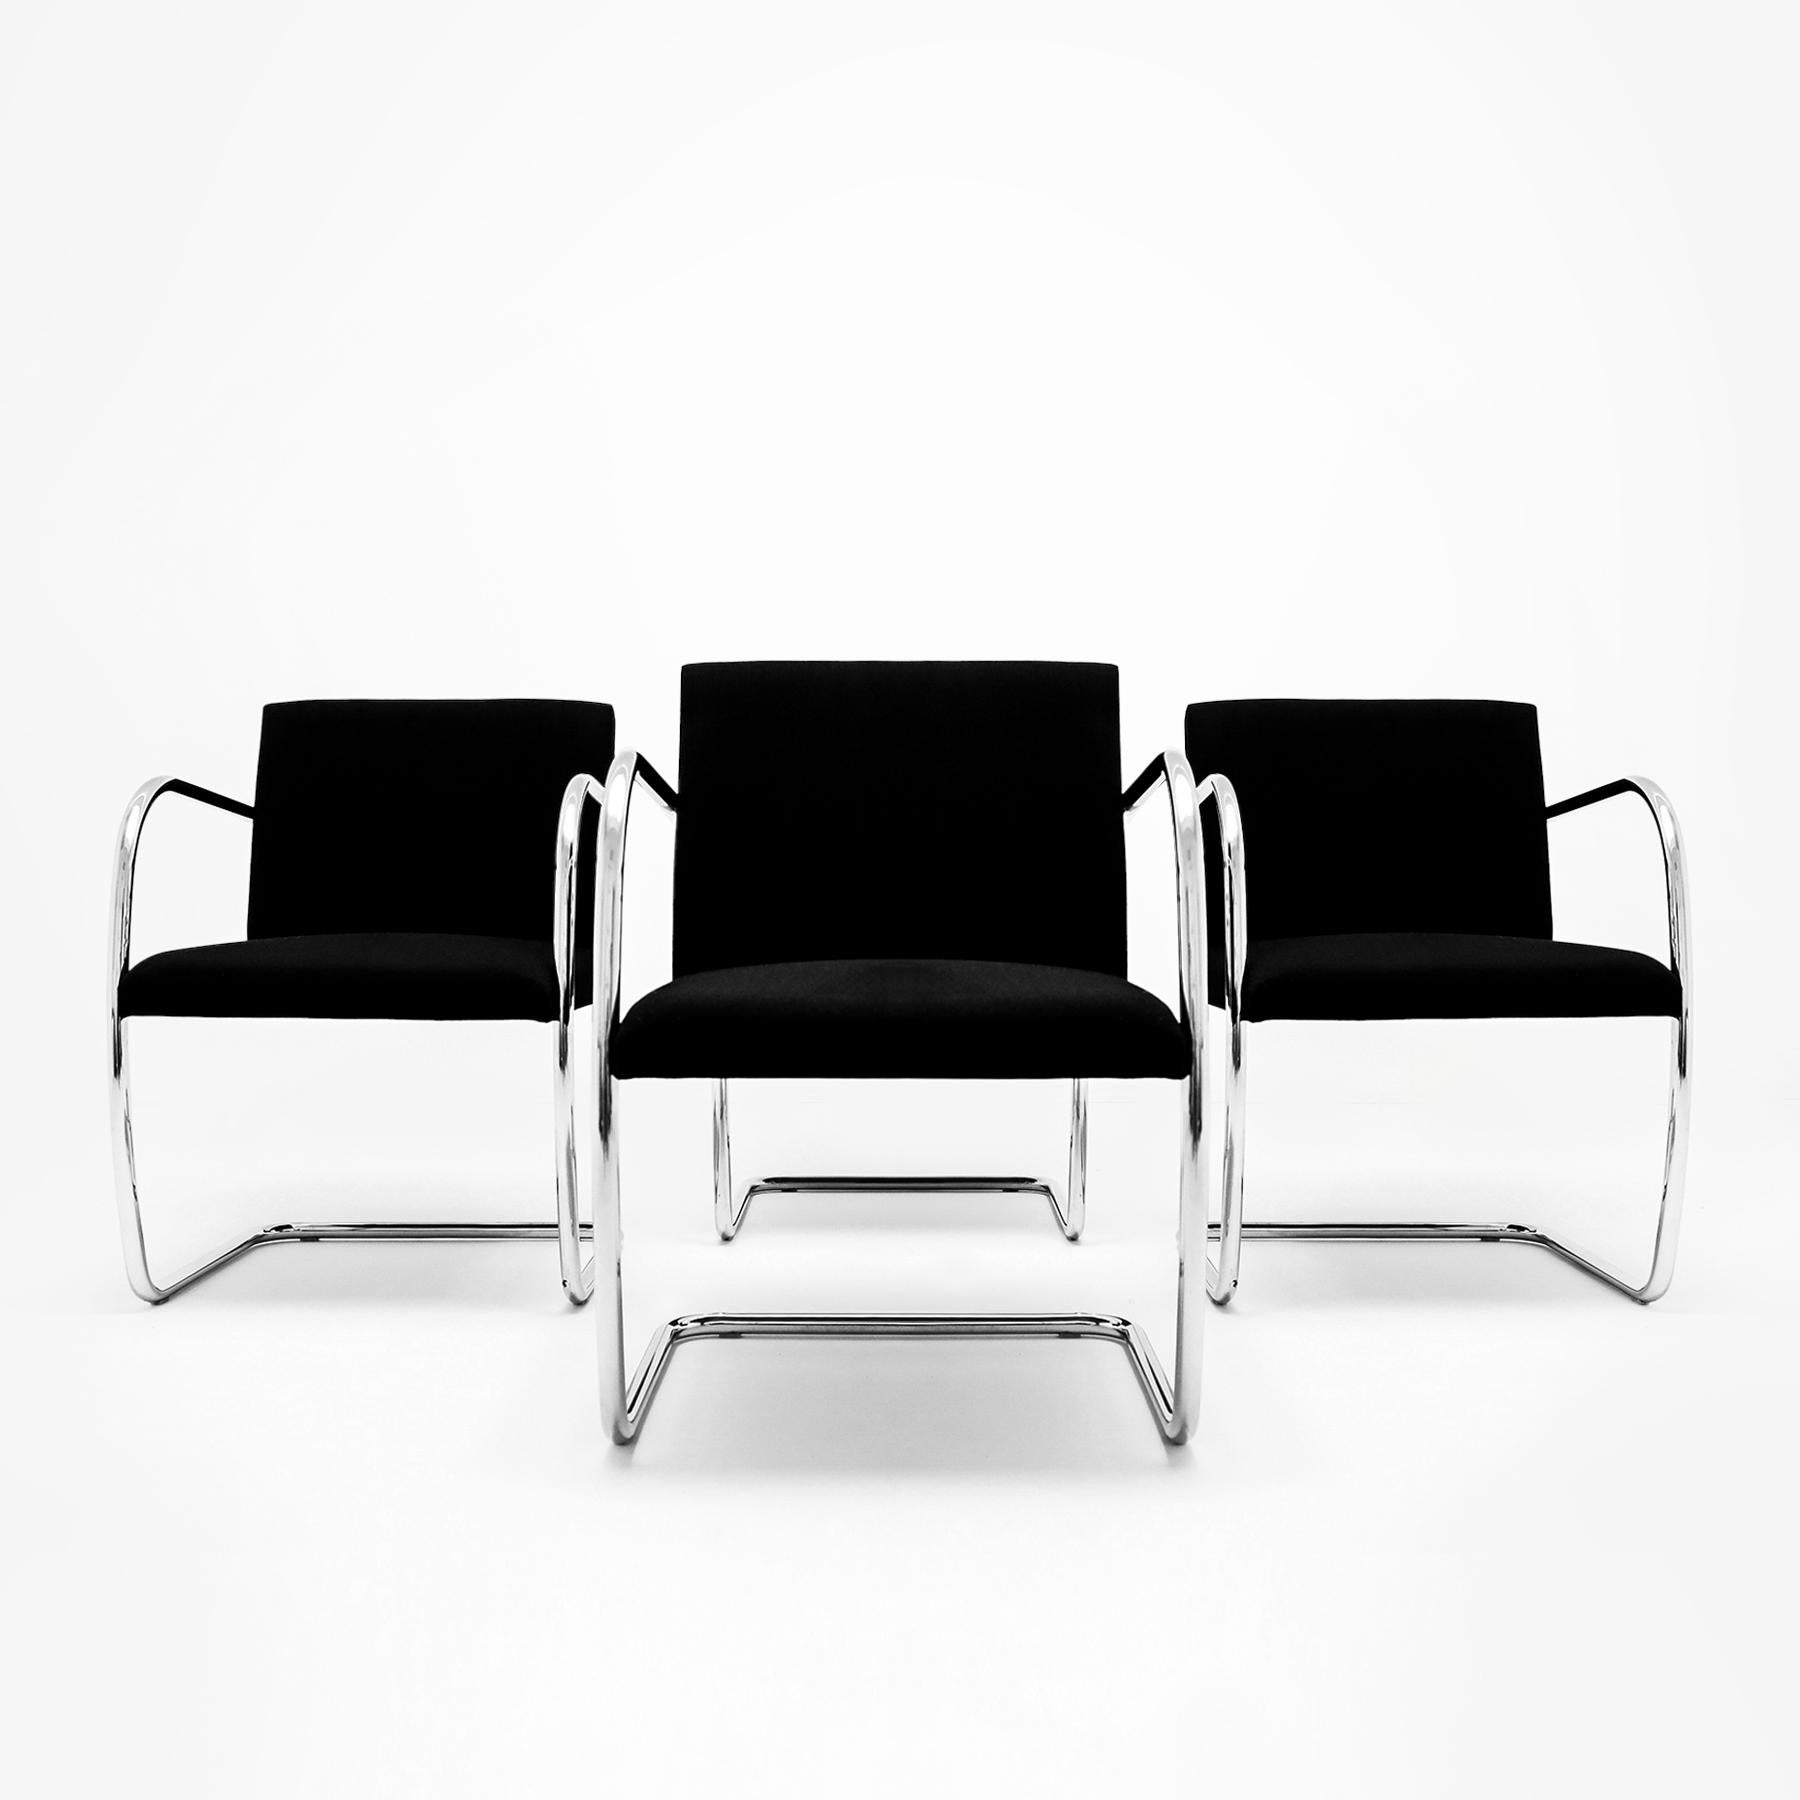 A set of 4 vintage Mies van der Rohe Knoll, MR50 BRNO tubular chrome and black fabric dining chairs. The price listed is for the 4 chairs as shown.

Designed by Ludwig Mies van der Rohe at his Tugendhat House in Brno, Czech Republic, the Brno Chair